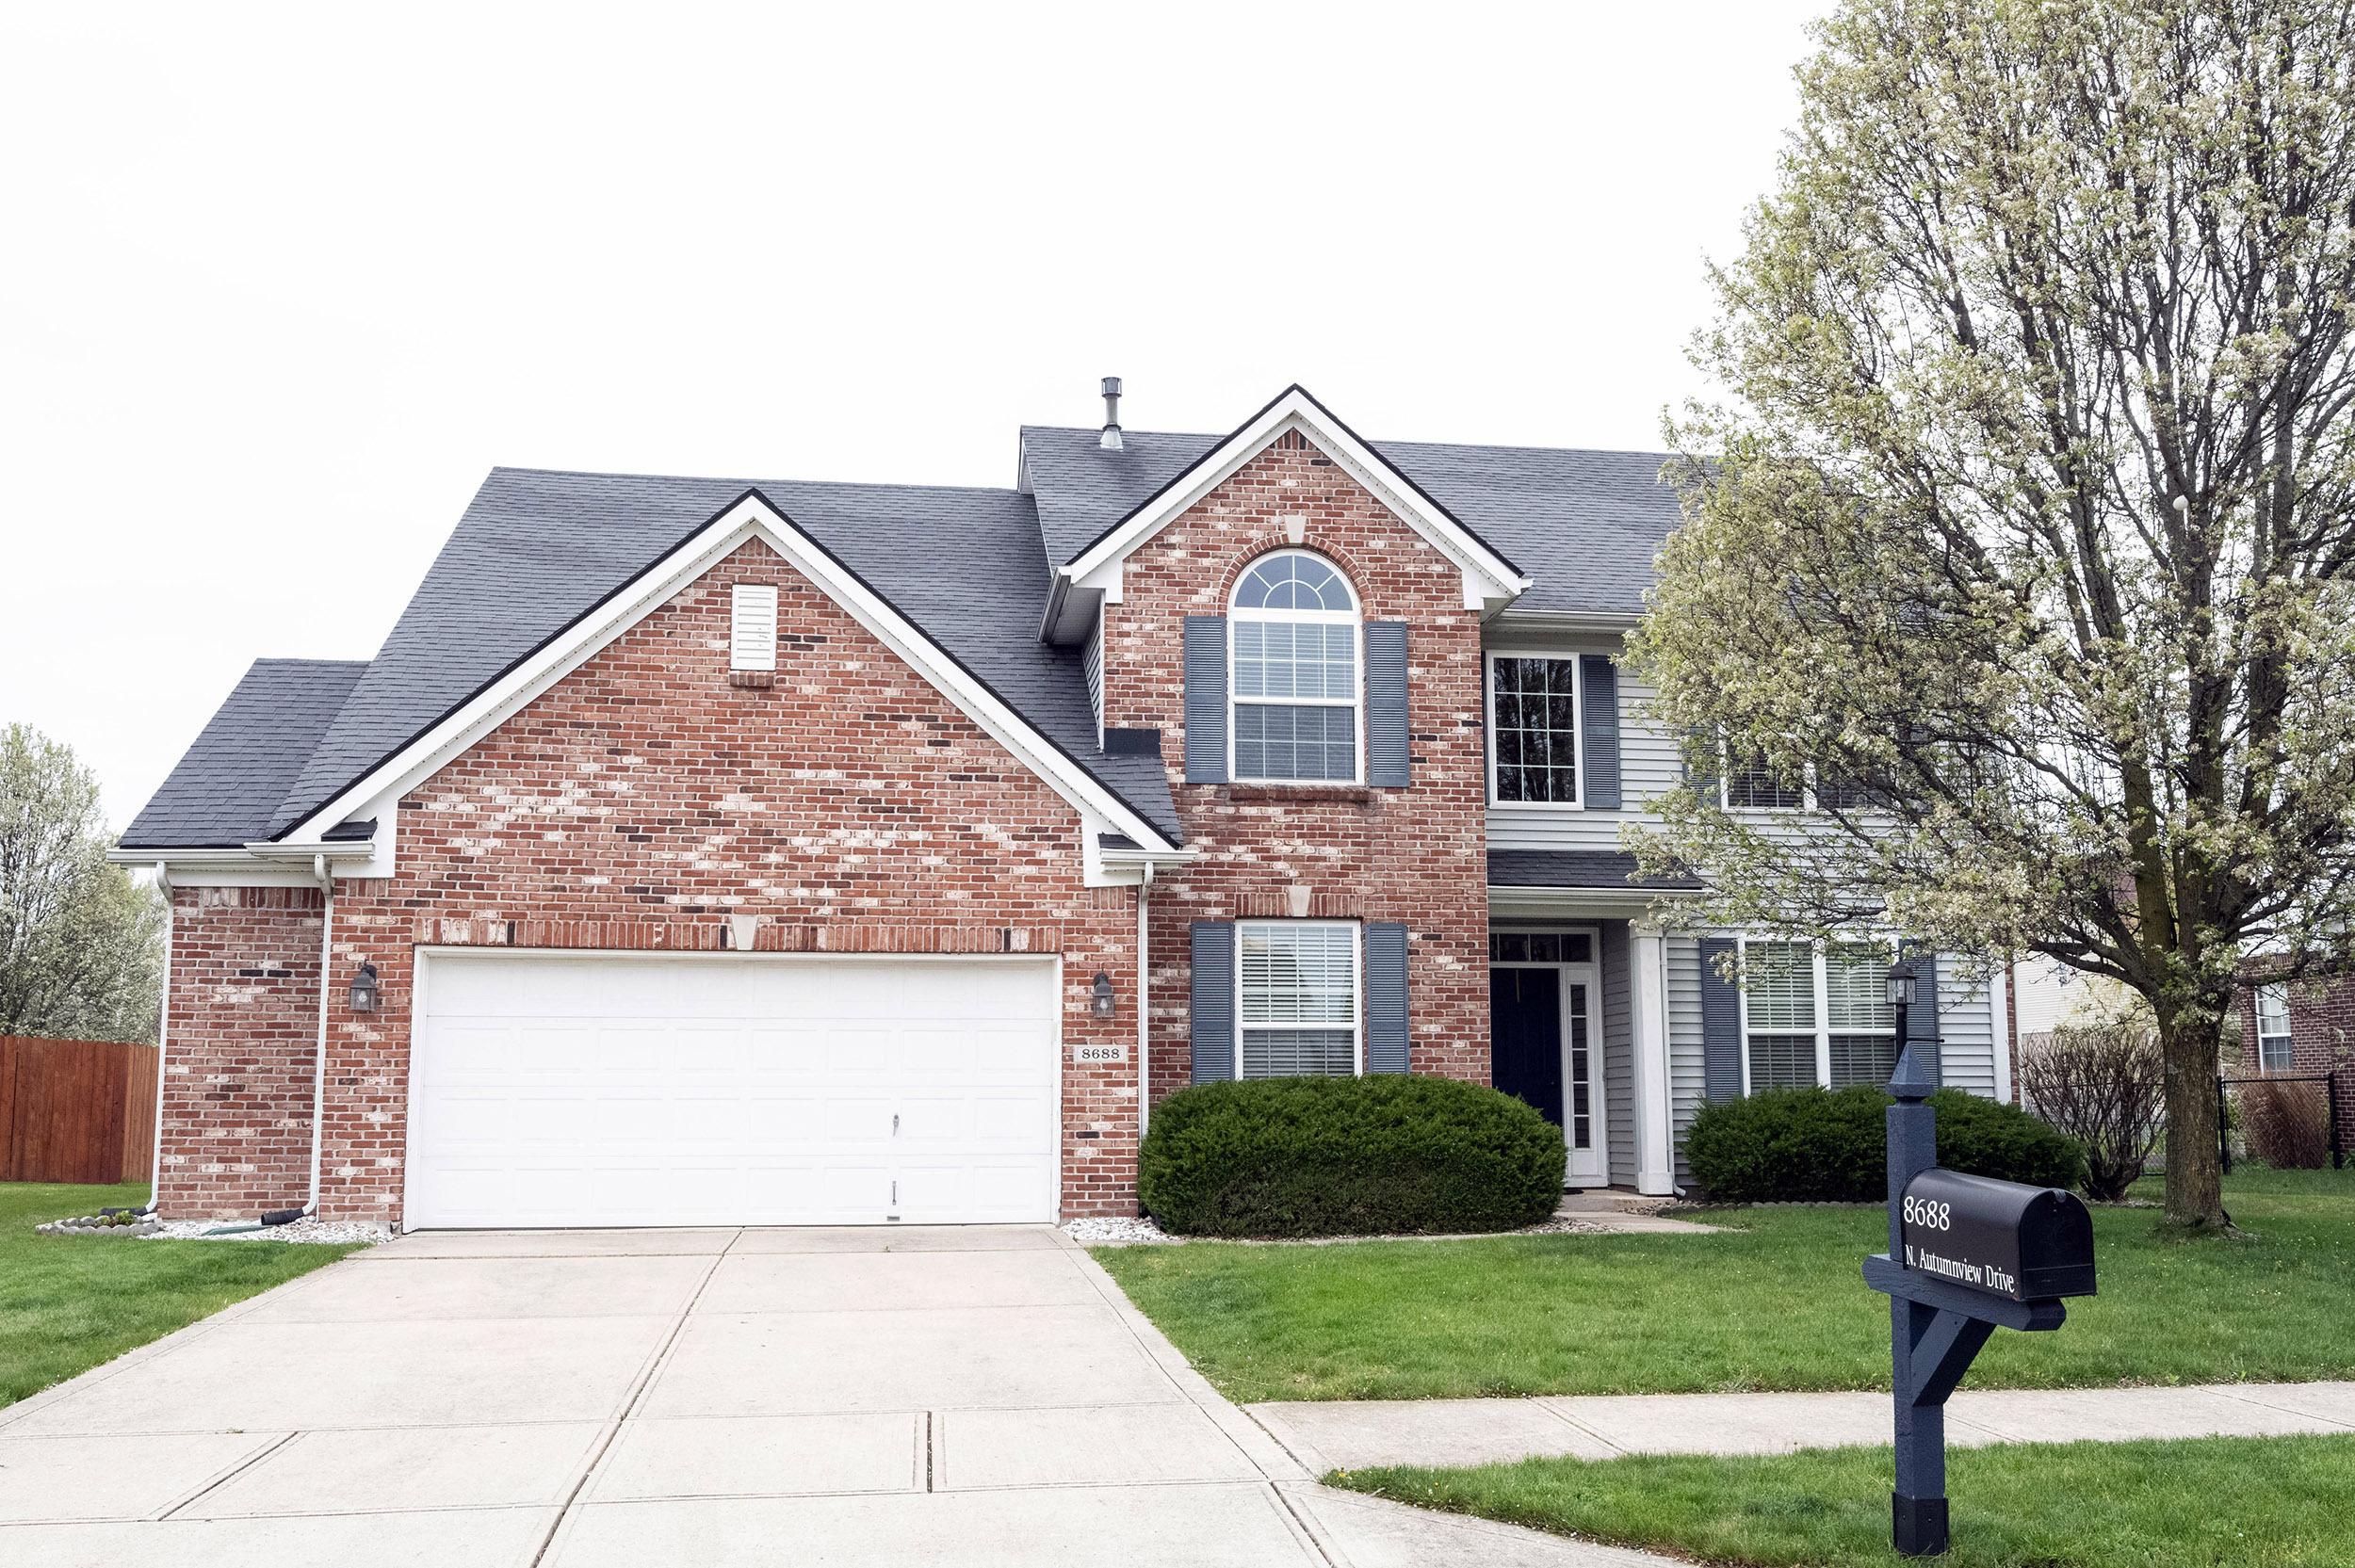 Photo one of 8688 N Autumnview Dr McCordsville IN 46055 | MLS 21971956